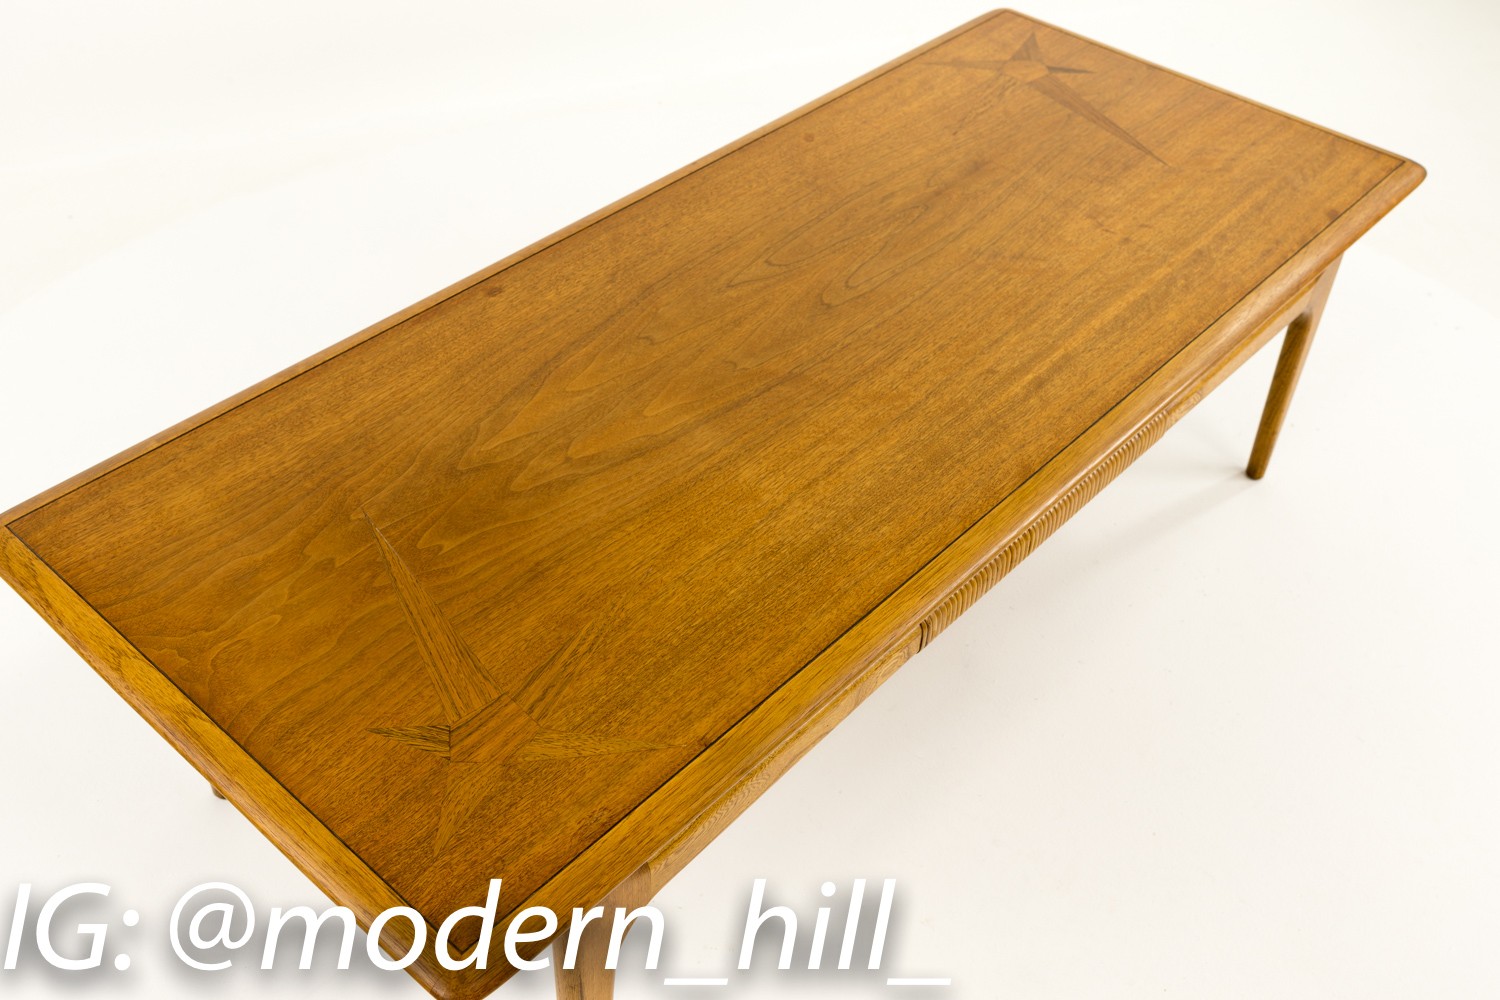 Lane Mid Century Coffee Table with Inlays